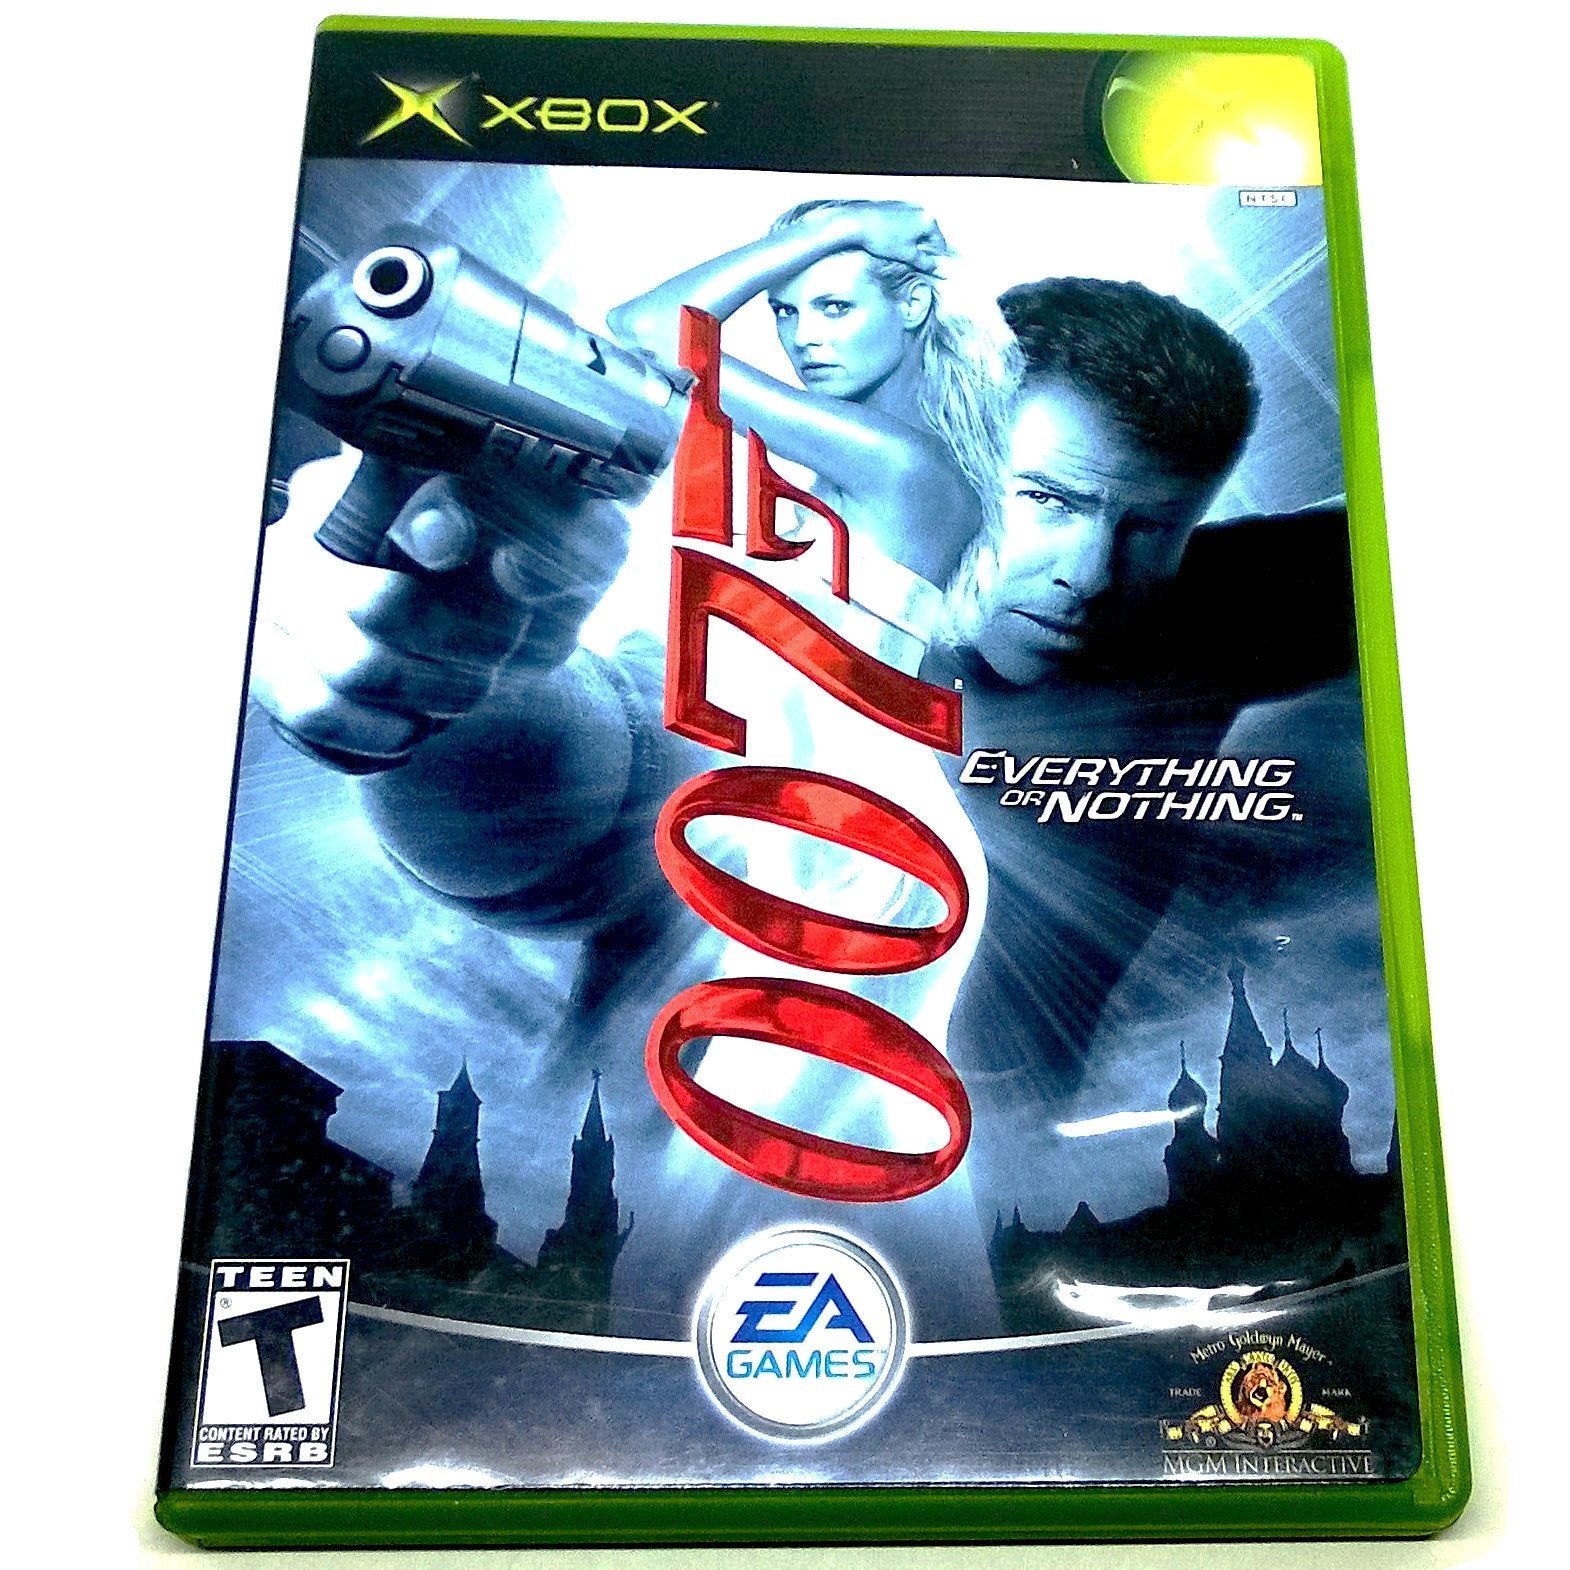 James Bond 007: Everything or Nothing for Xbox - Front of case